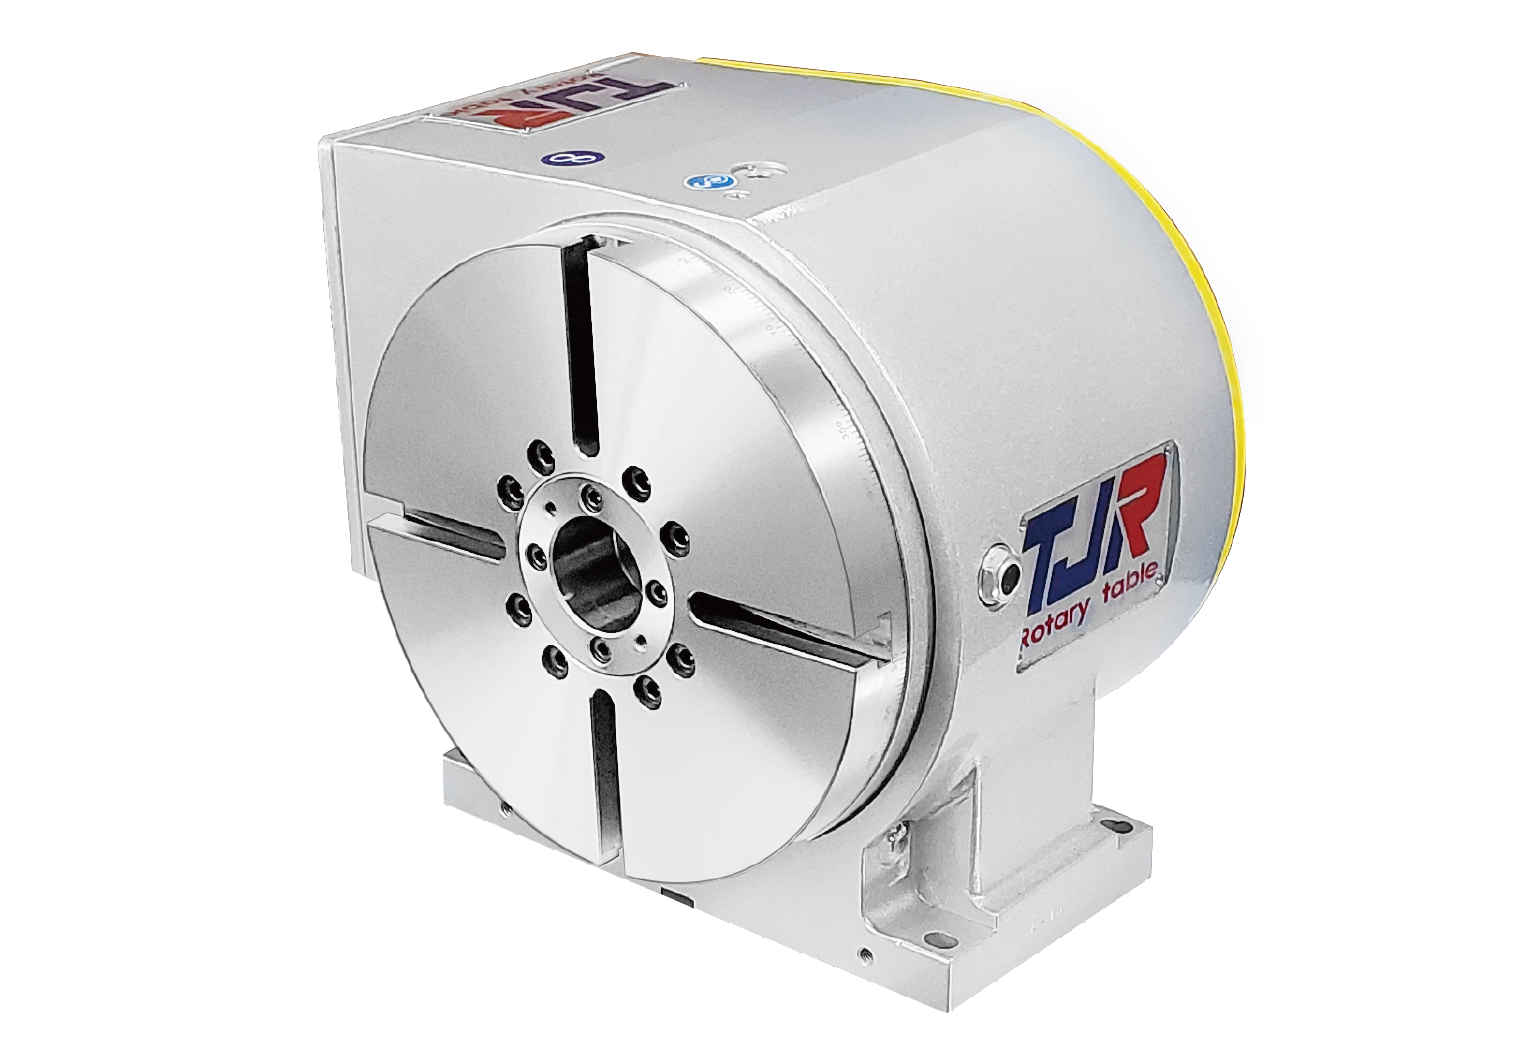 Products|The 4th Axis Direct Drive Motor Series (Pneumatic Brake)